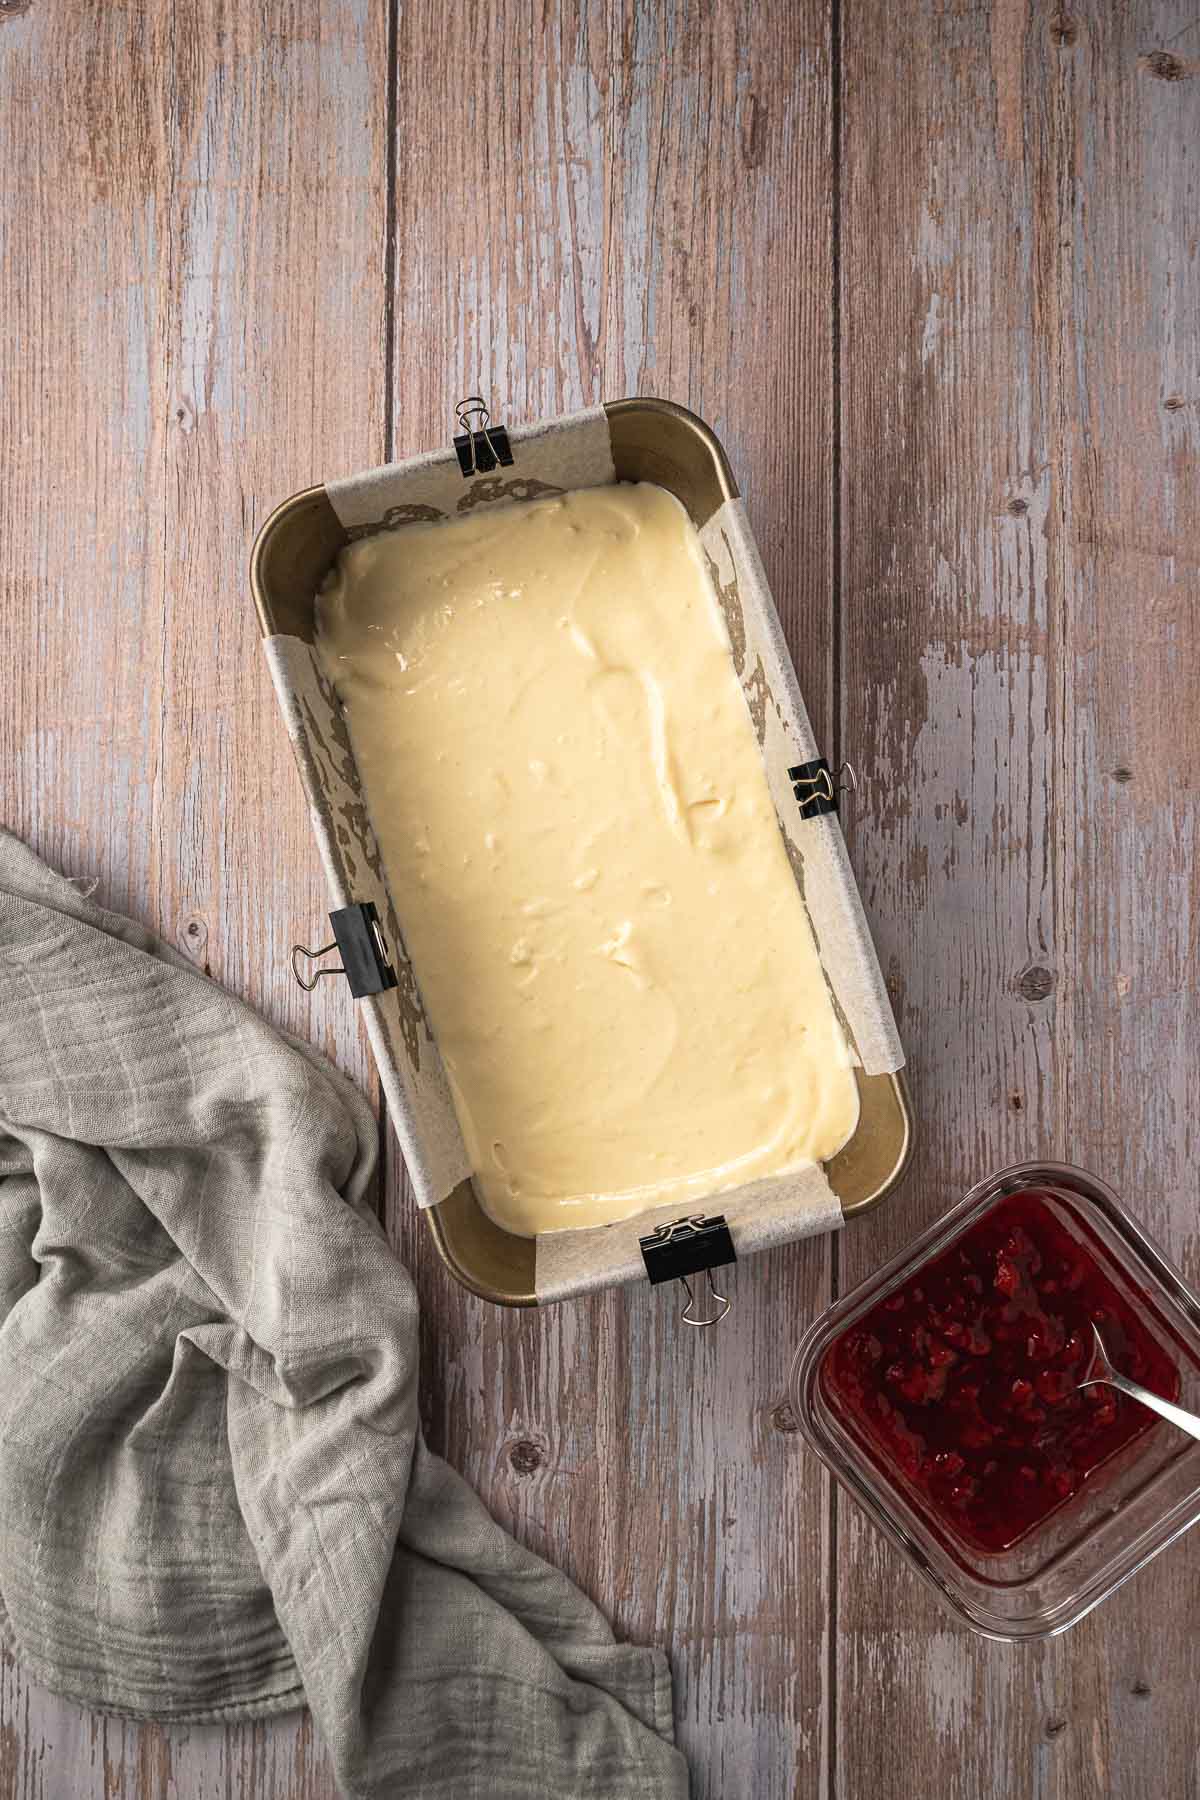 Cheesecake filling poured into the loaf tin